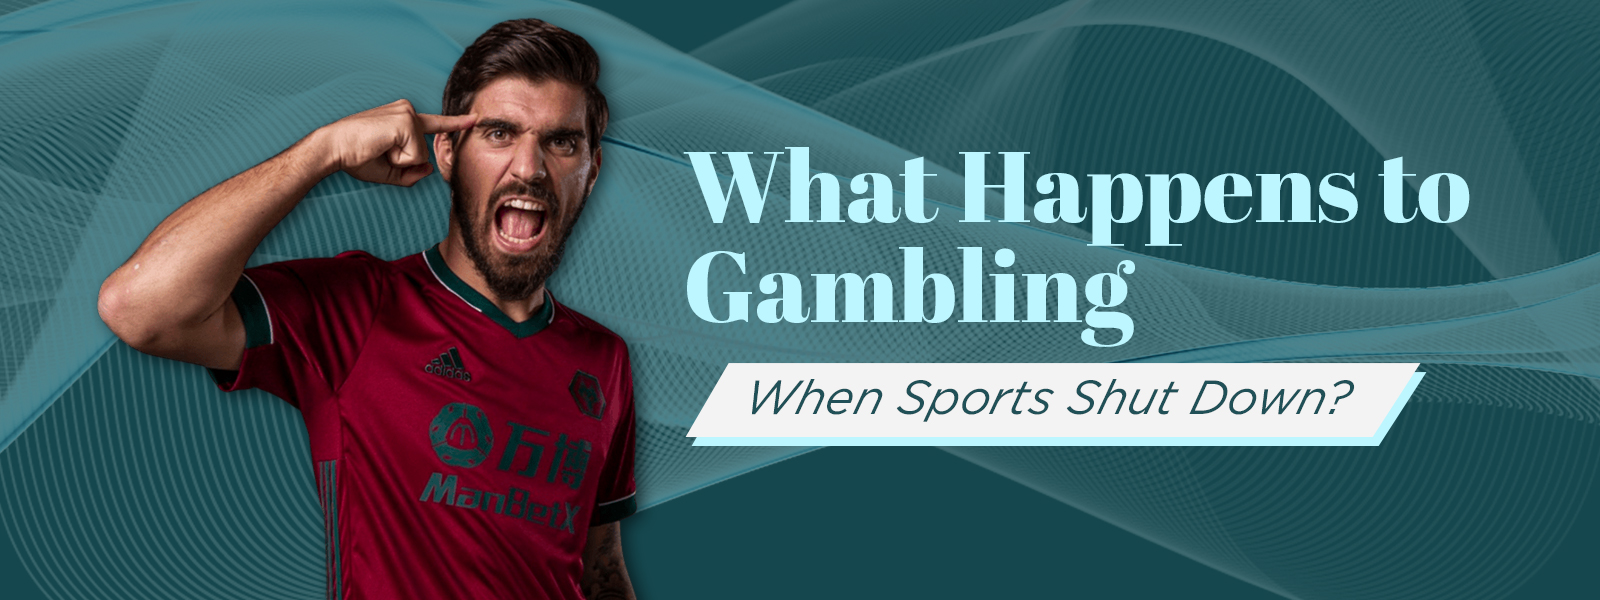 What If Sports Shutting Down? What Will Happen To Gambling Industry?